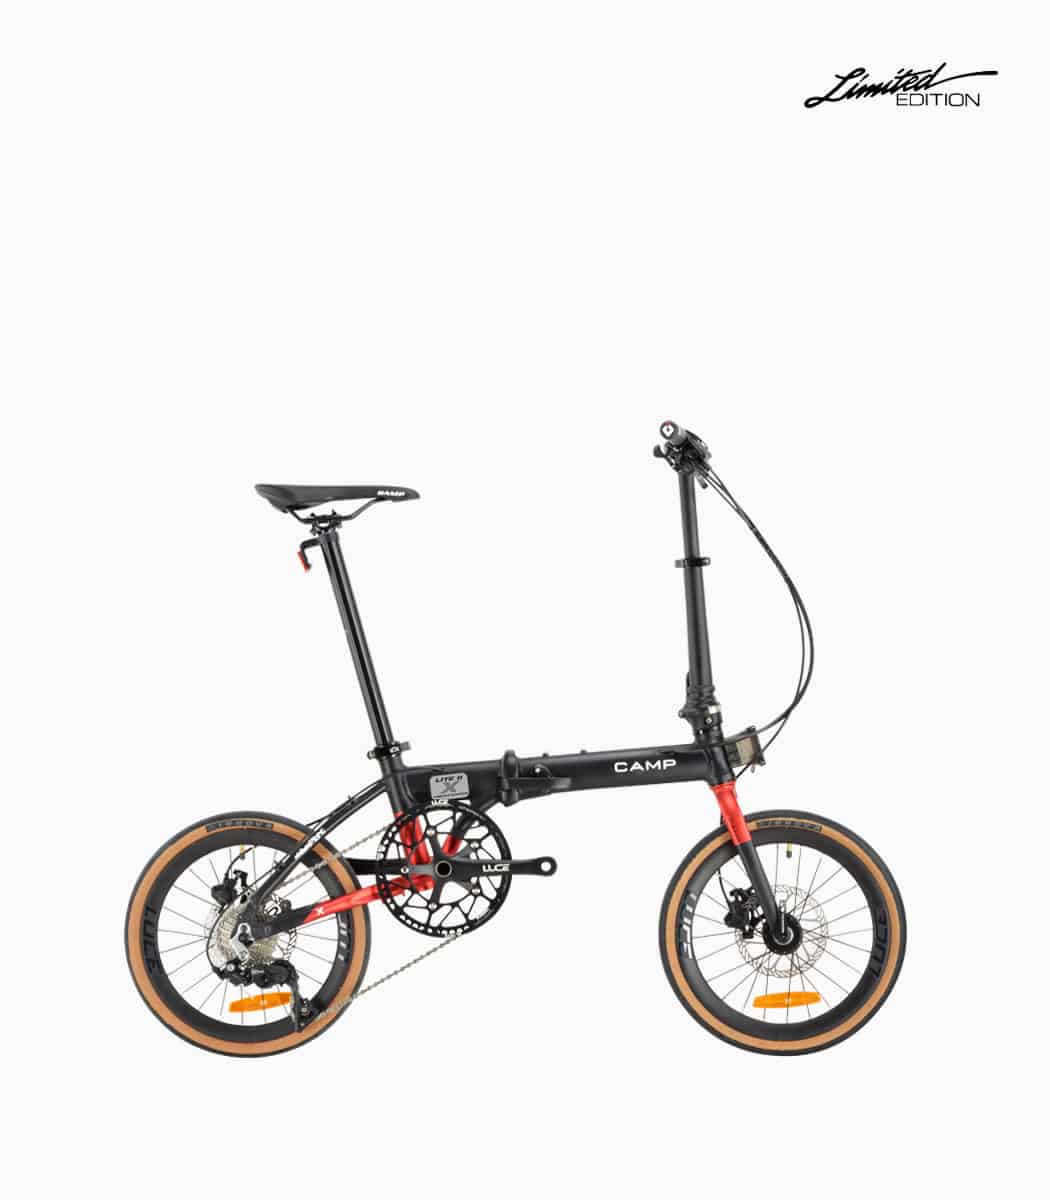 CAMP Lite 11X (BLACK-RED) foldable bicycle right V1